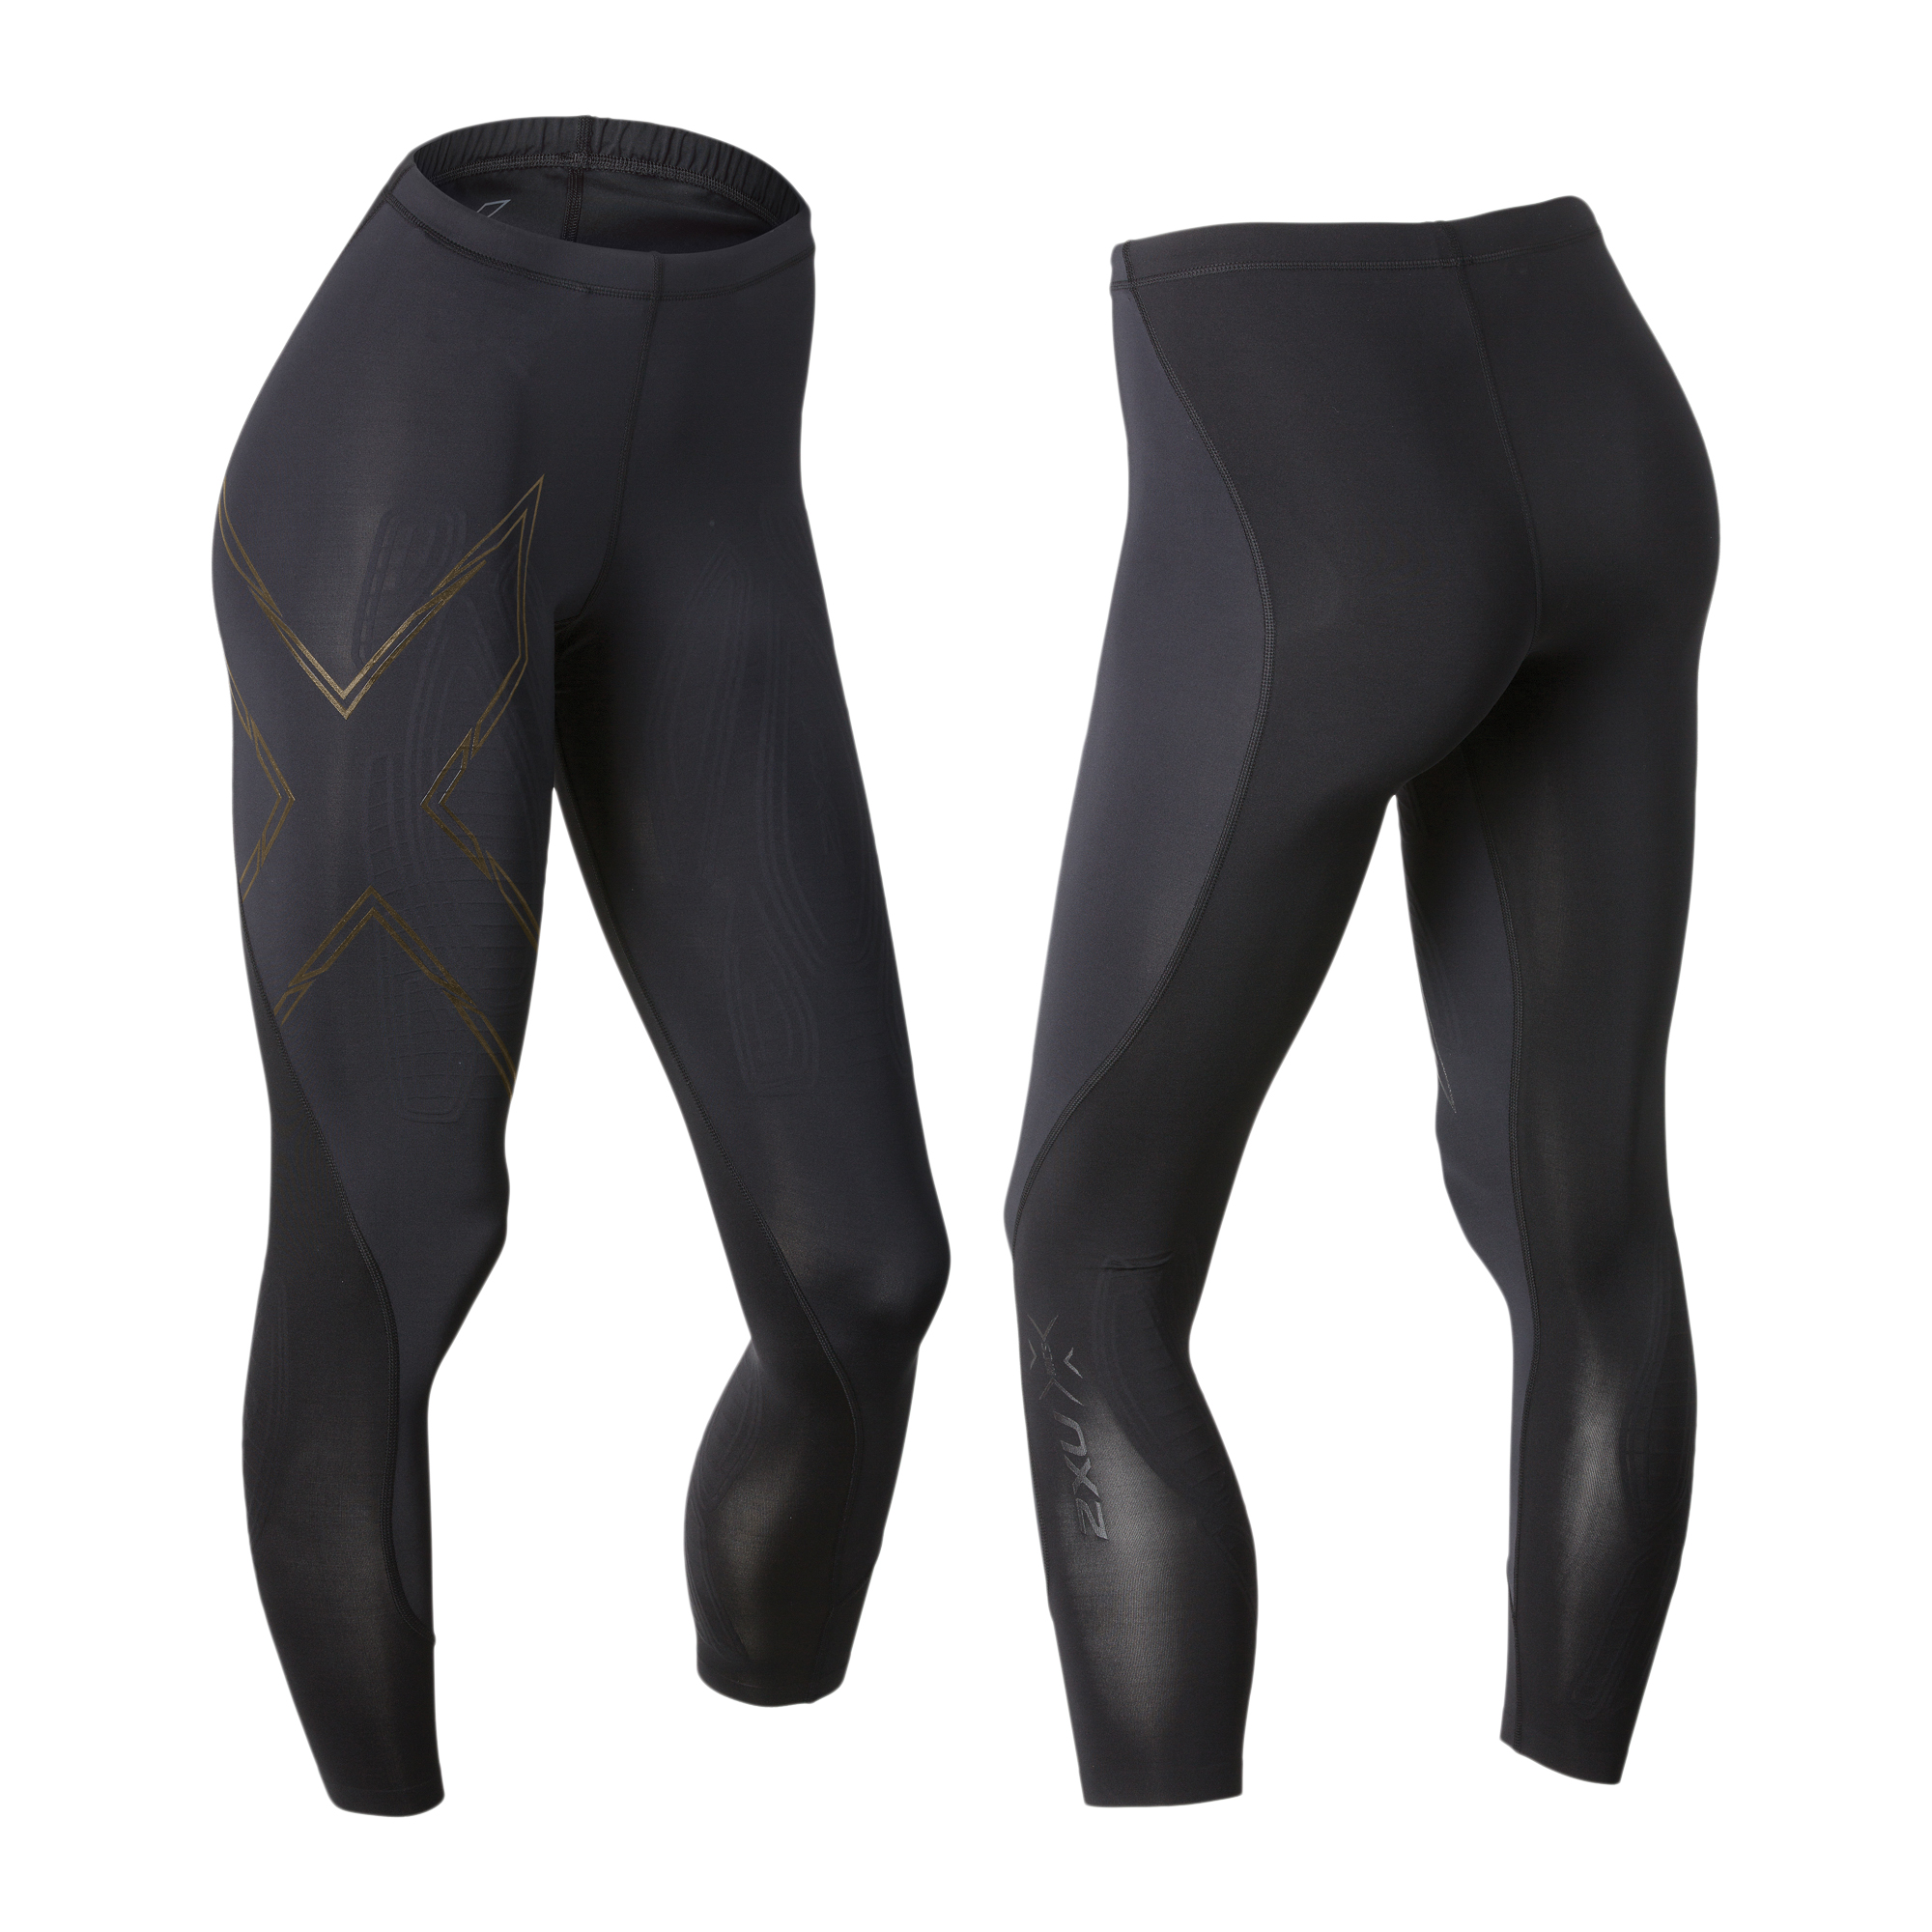  2XU Mcs x Training Comp Tights, Black/Gold, x Small : Clothing,  Shoes & Jewelry